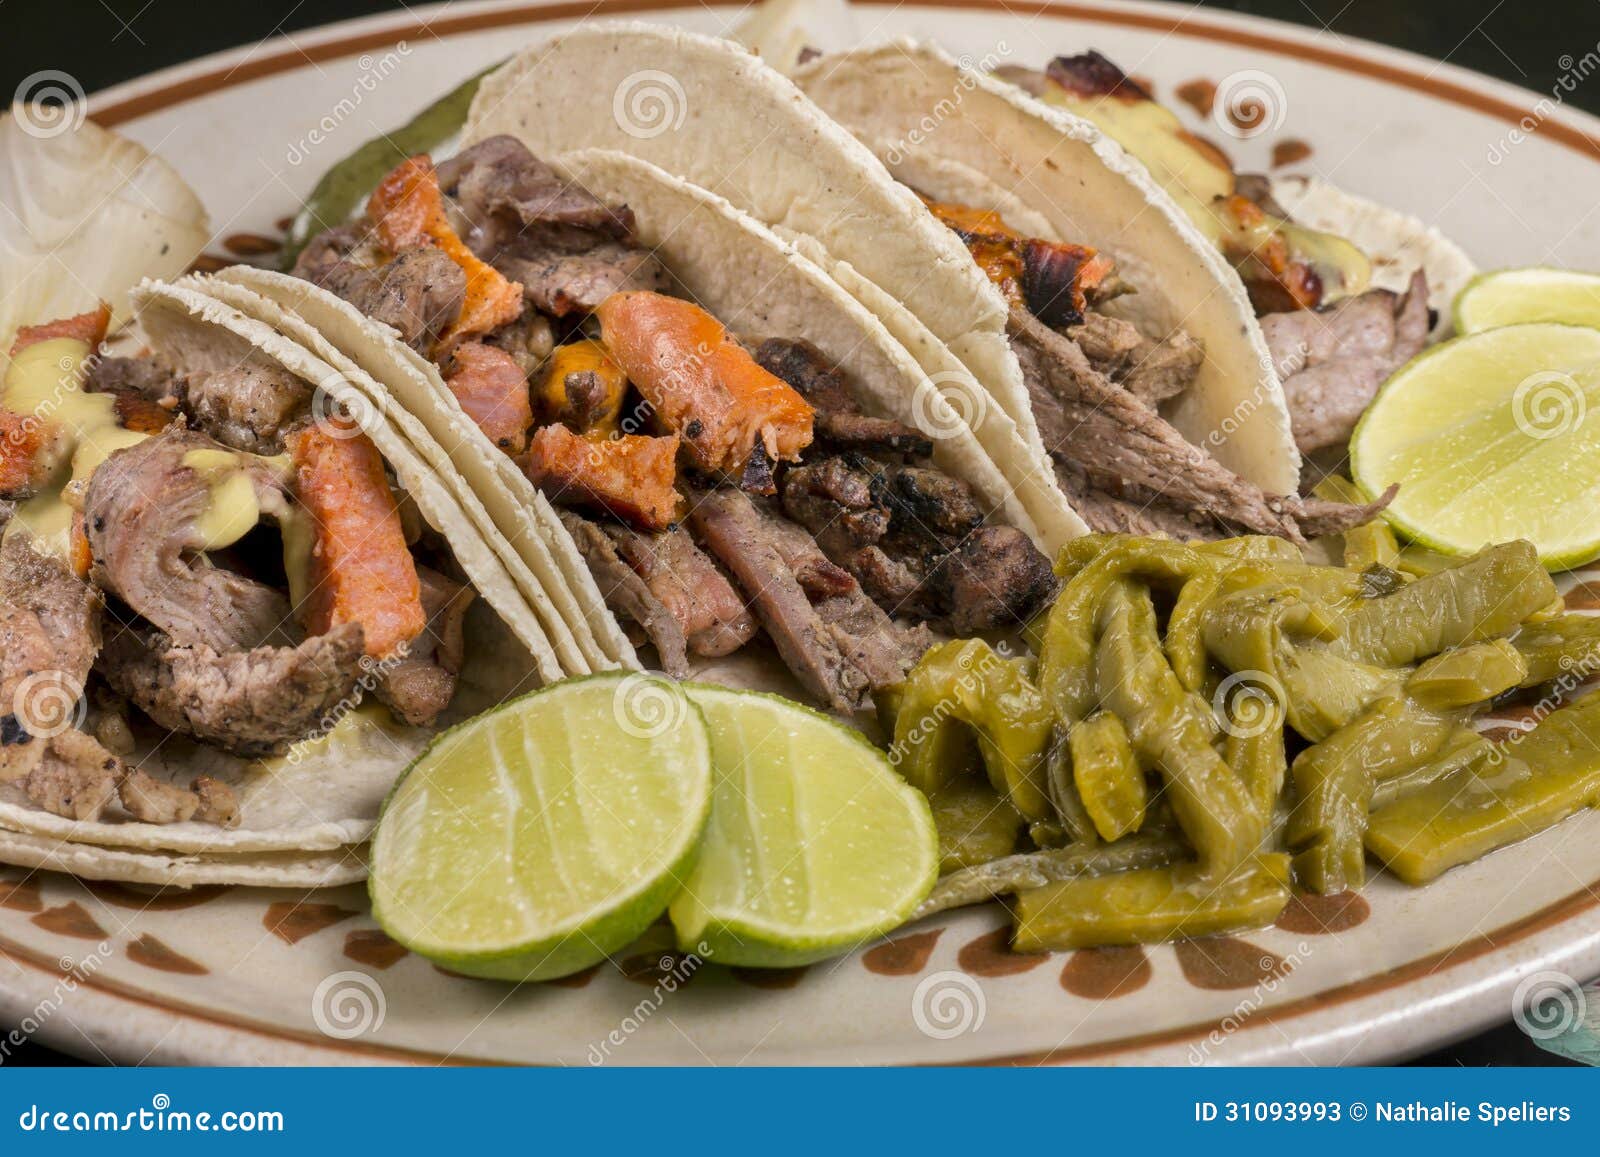 Salsa And Arrachera Tacos Stock Image Image Of Taco 31093993 - roblox tacos related keywords suggestions roblox tacos